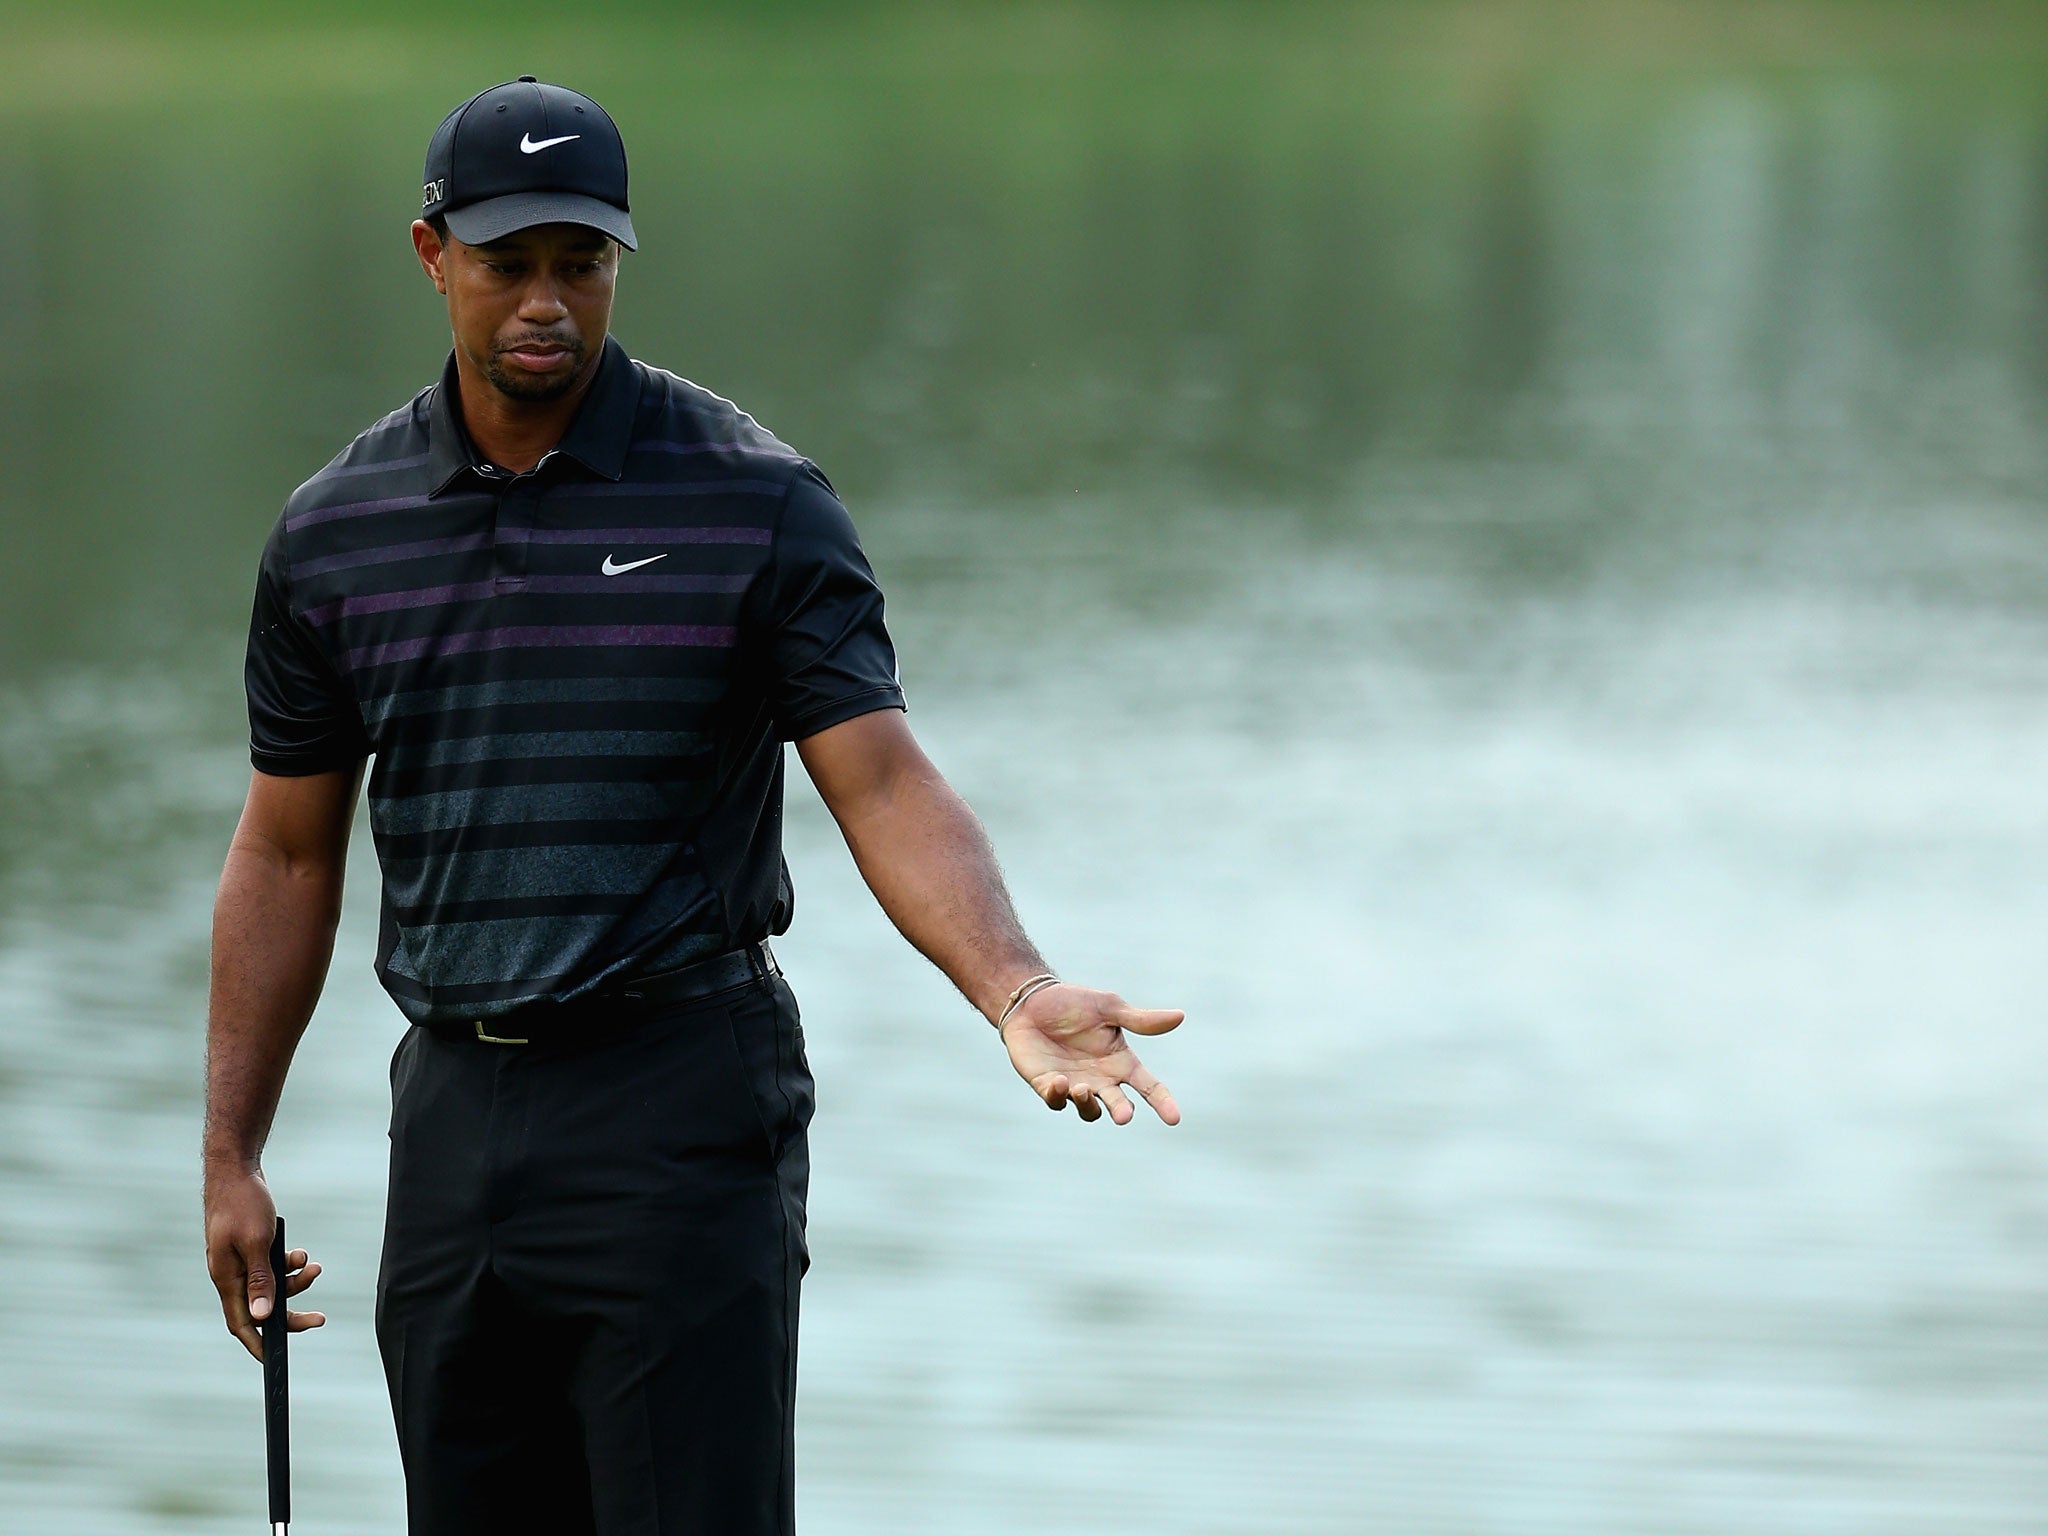 Tiger Woods reacts to a missed putt on the first day of the Turkish Open on Thursday